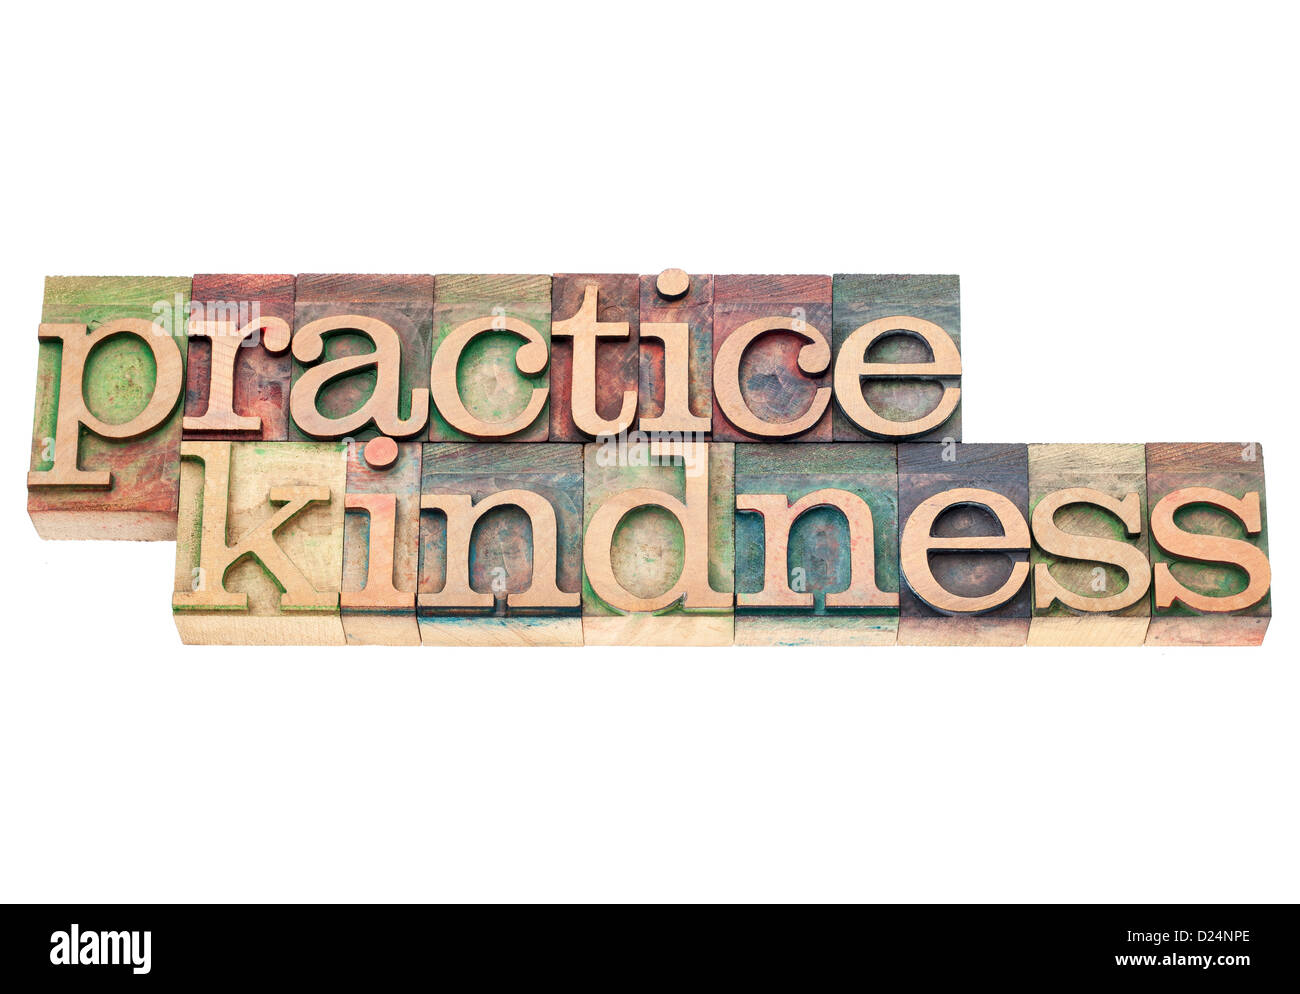 practice kindness - isolated text in vintage letterpress wood type printing blocks Stock Photo